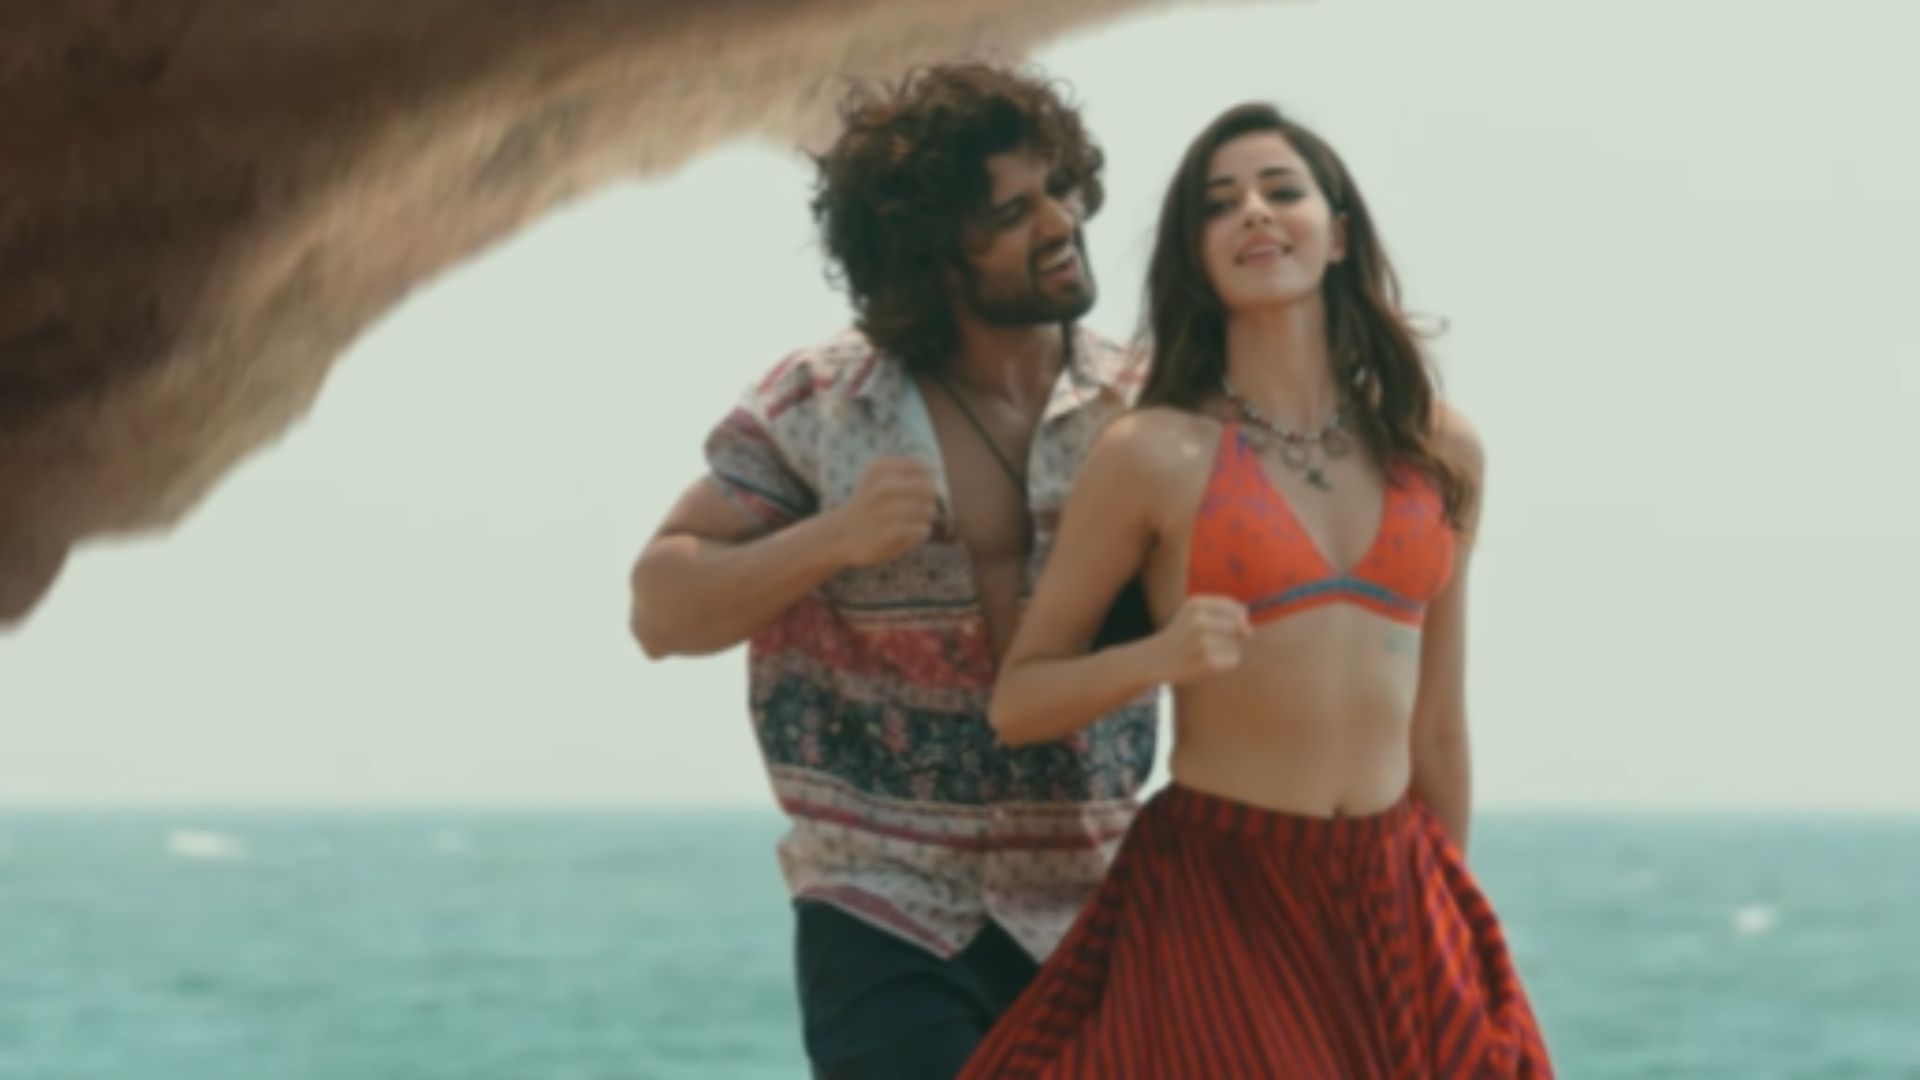 ‘Liger’ ‘Aafat’ Song Review: Vijay, Ananya Are Hot, But What Is With Those Sexist Lyrics?